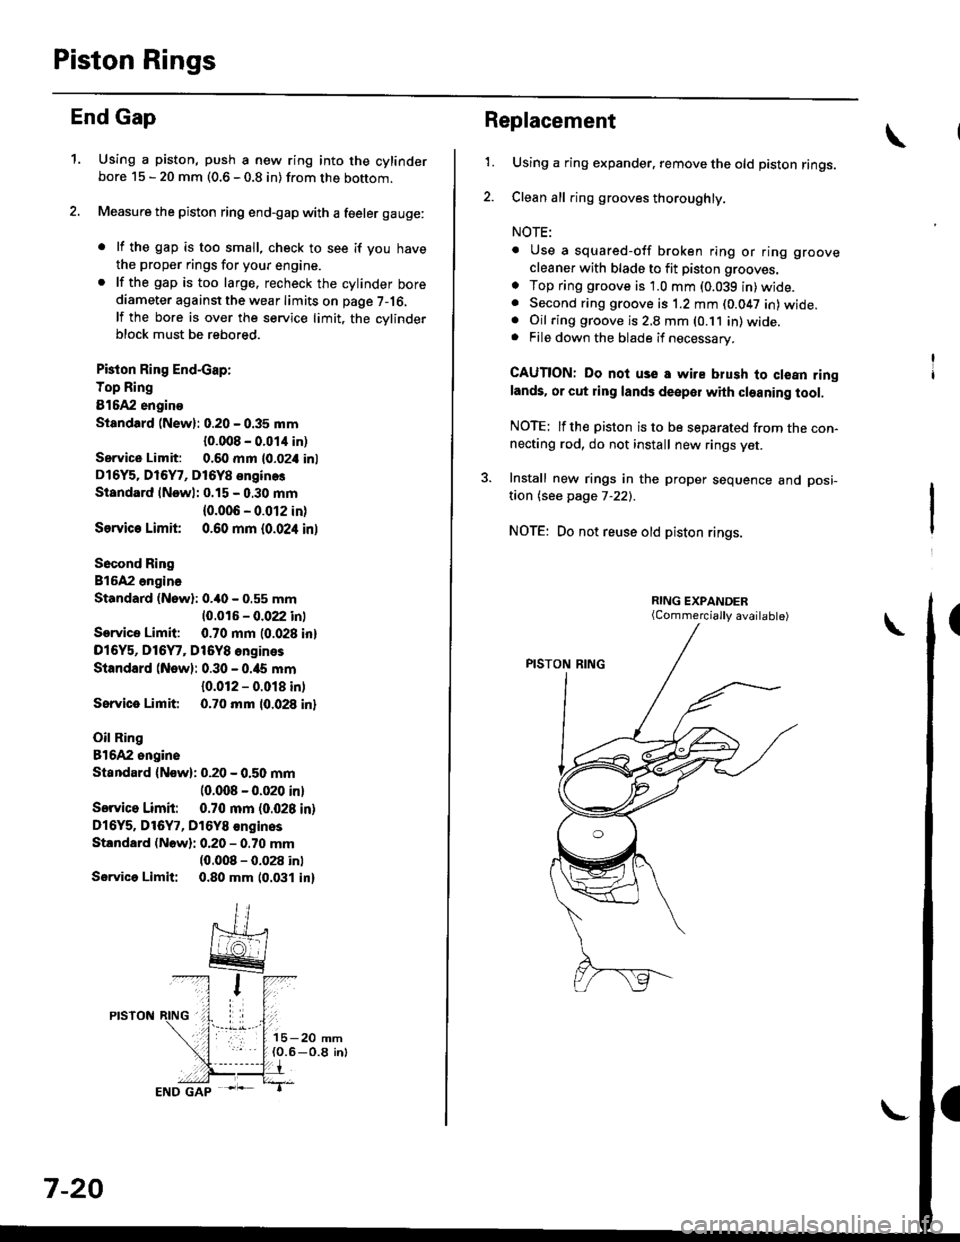 HONDA CIVIC 1997 6.G Workshop Manual Piston Rings
End Gap
1.Using a piston, push a new ring into the cylinderbore 15 - 20 mm (0.6 - 0.8 in) from the bottom.
Measure the piston ring end-gap with a feeler gauge:
. lf the gap is too small, 